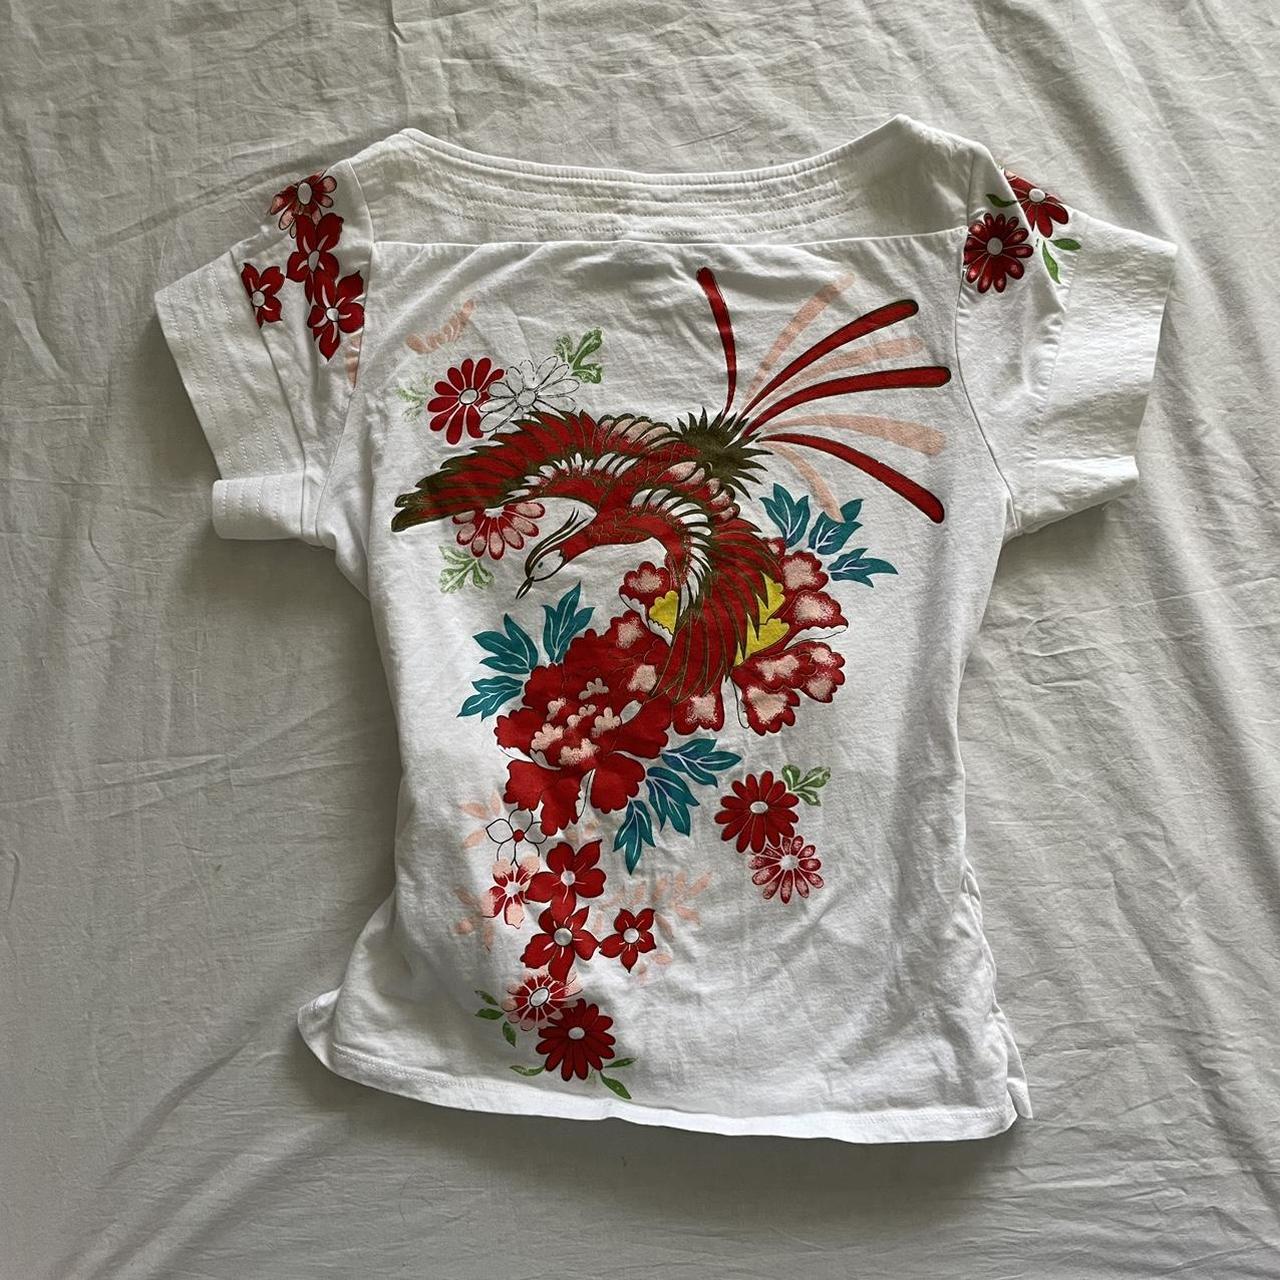 Delia's Women's White and Red Shirt